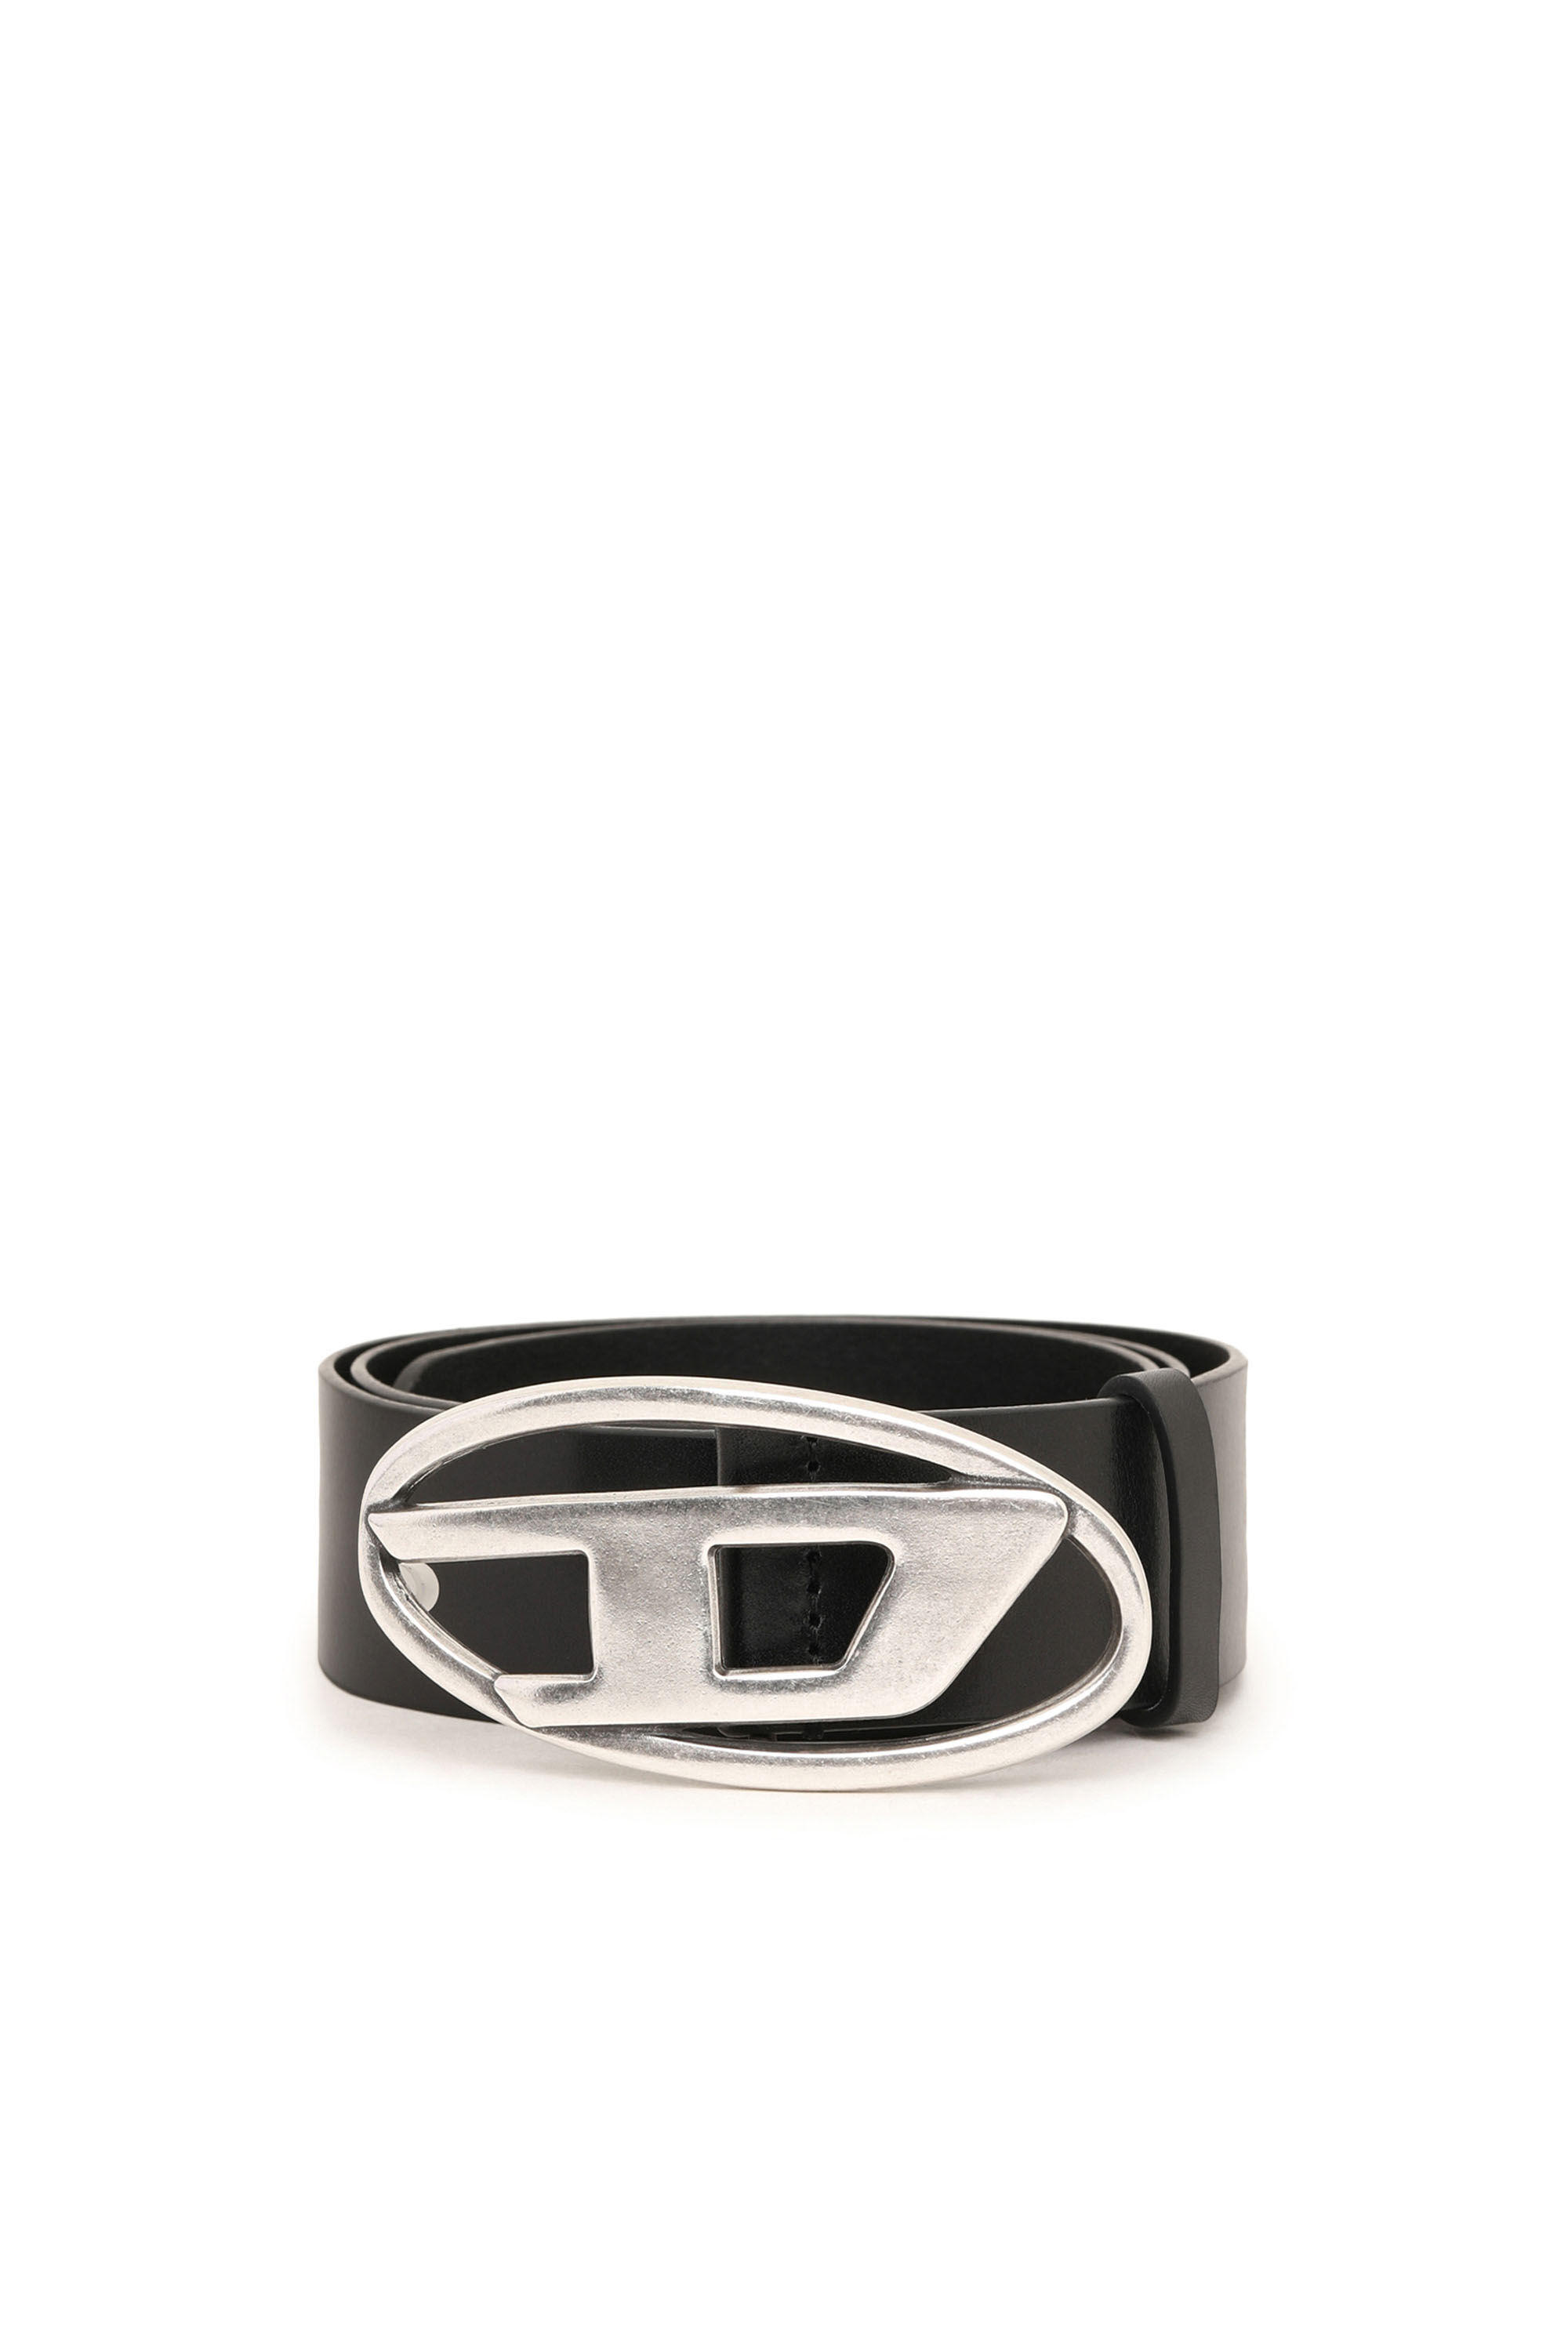 B-1DR: Leather belt with silver D buckle | Diesel